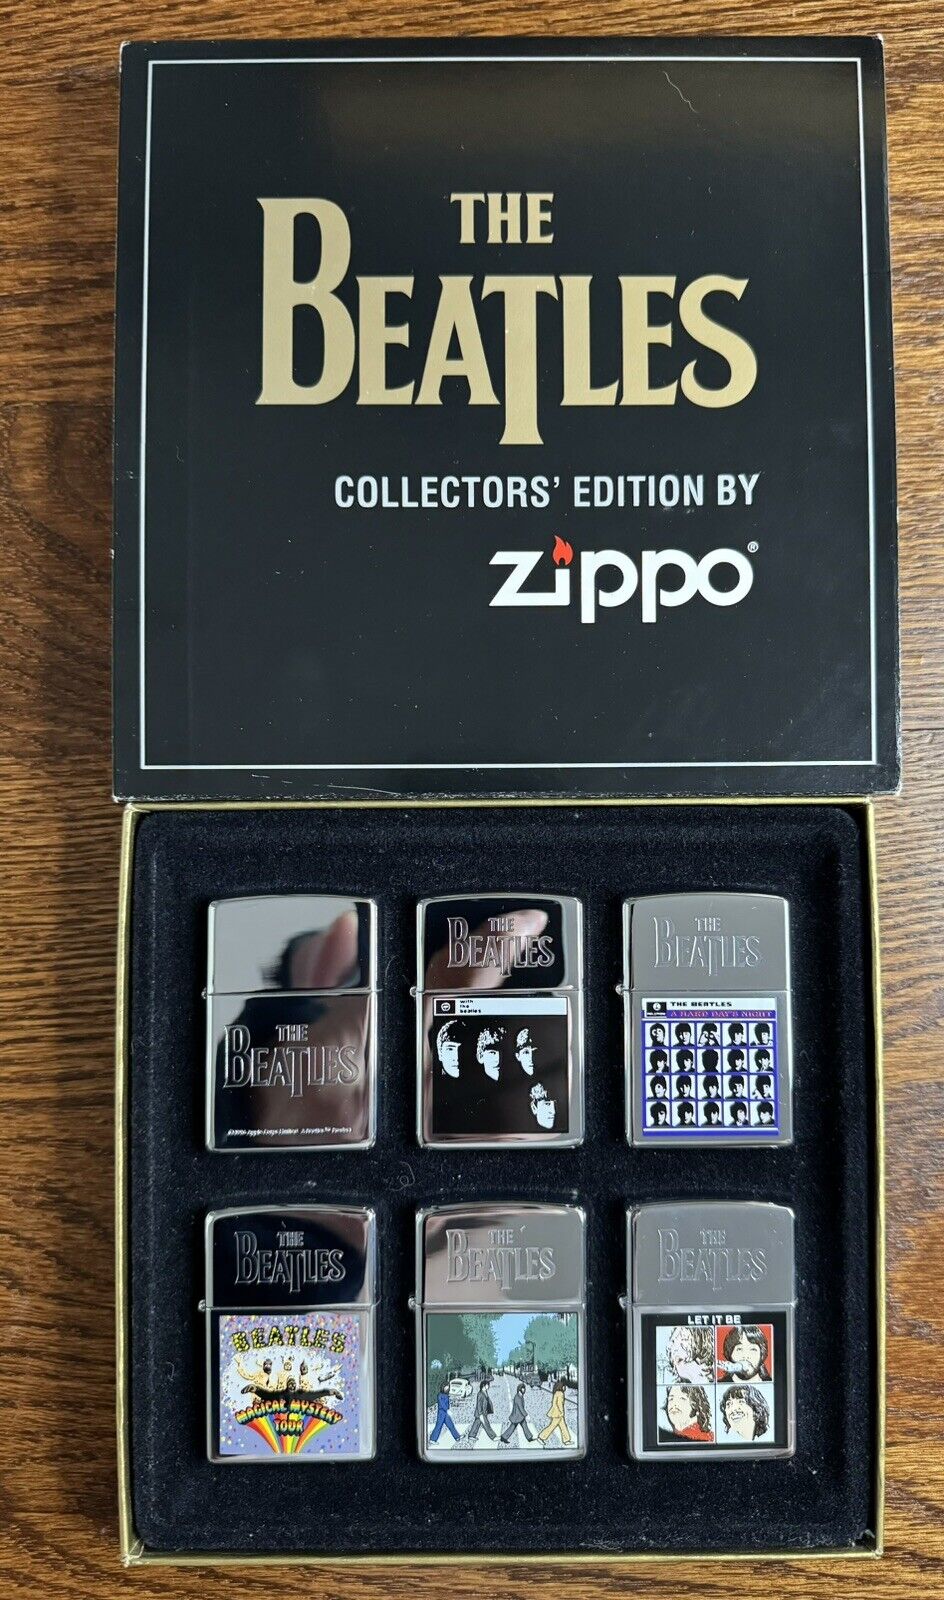 1996 VINTAGE ZIPPO THE BEATLES LIGHTER COLLECTION SET OF 6 NEW IN BOX RARE